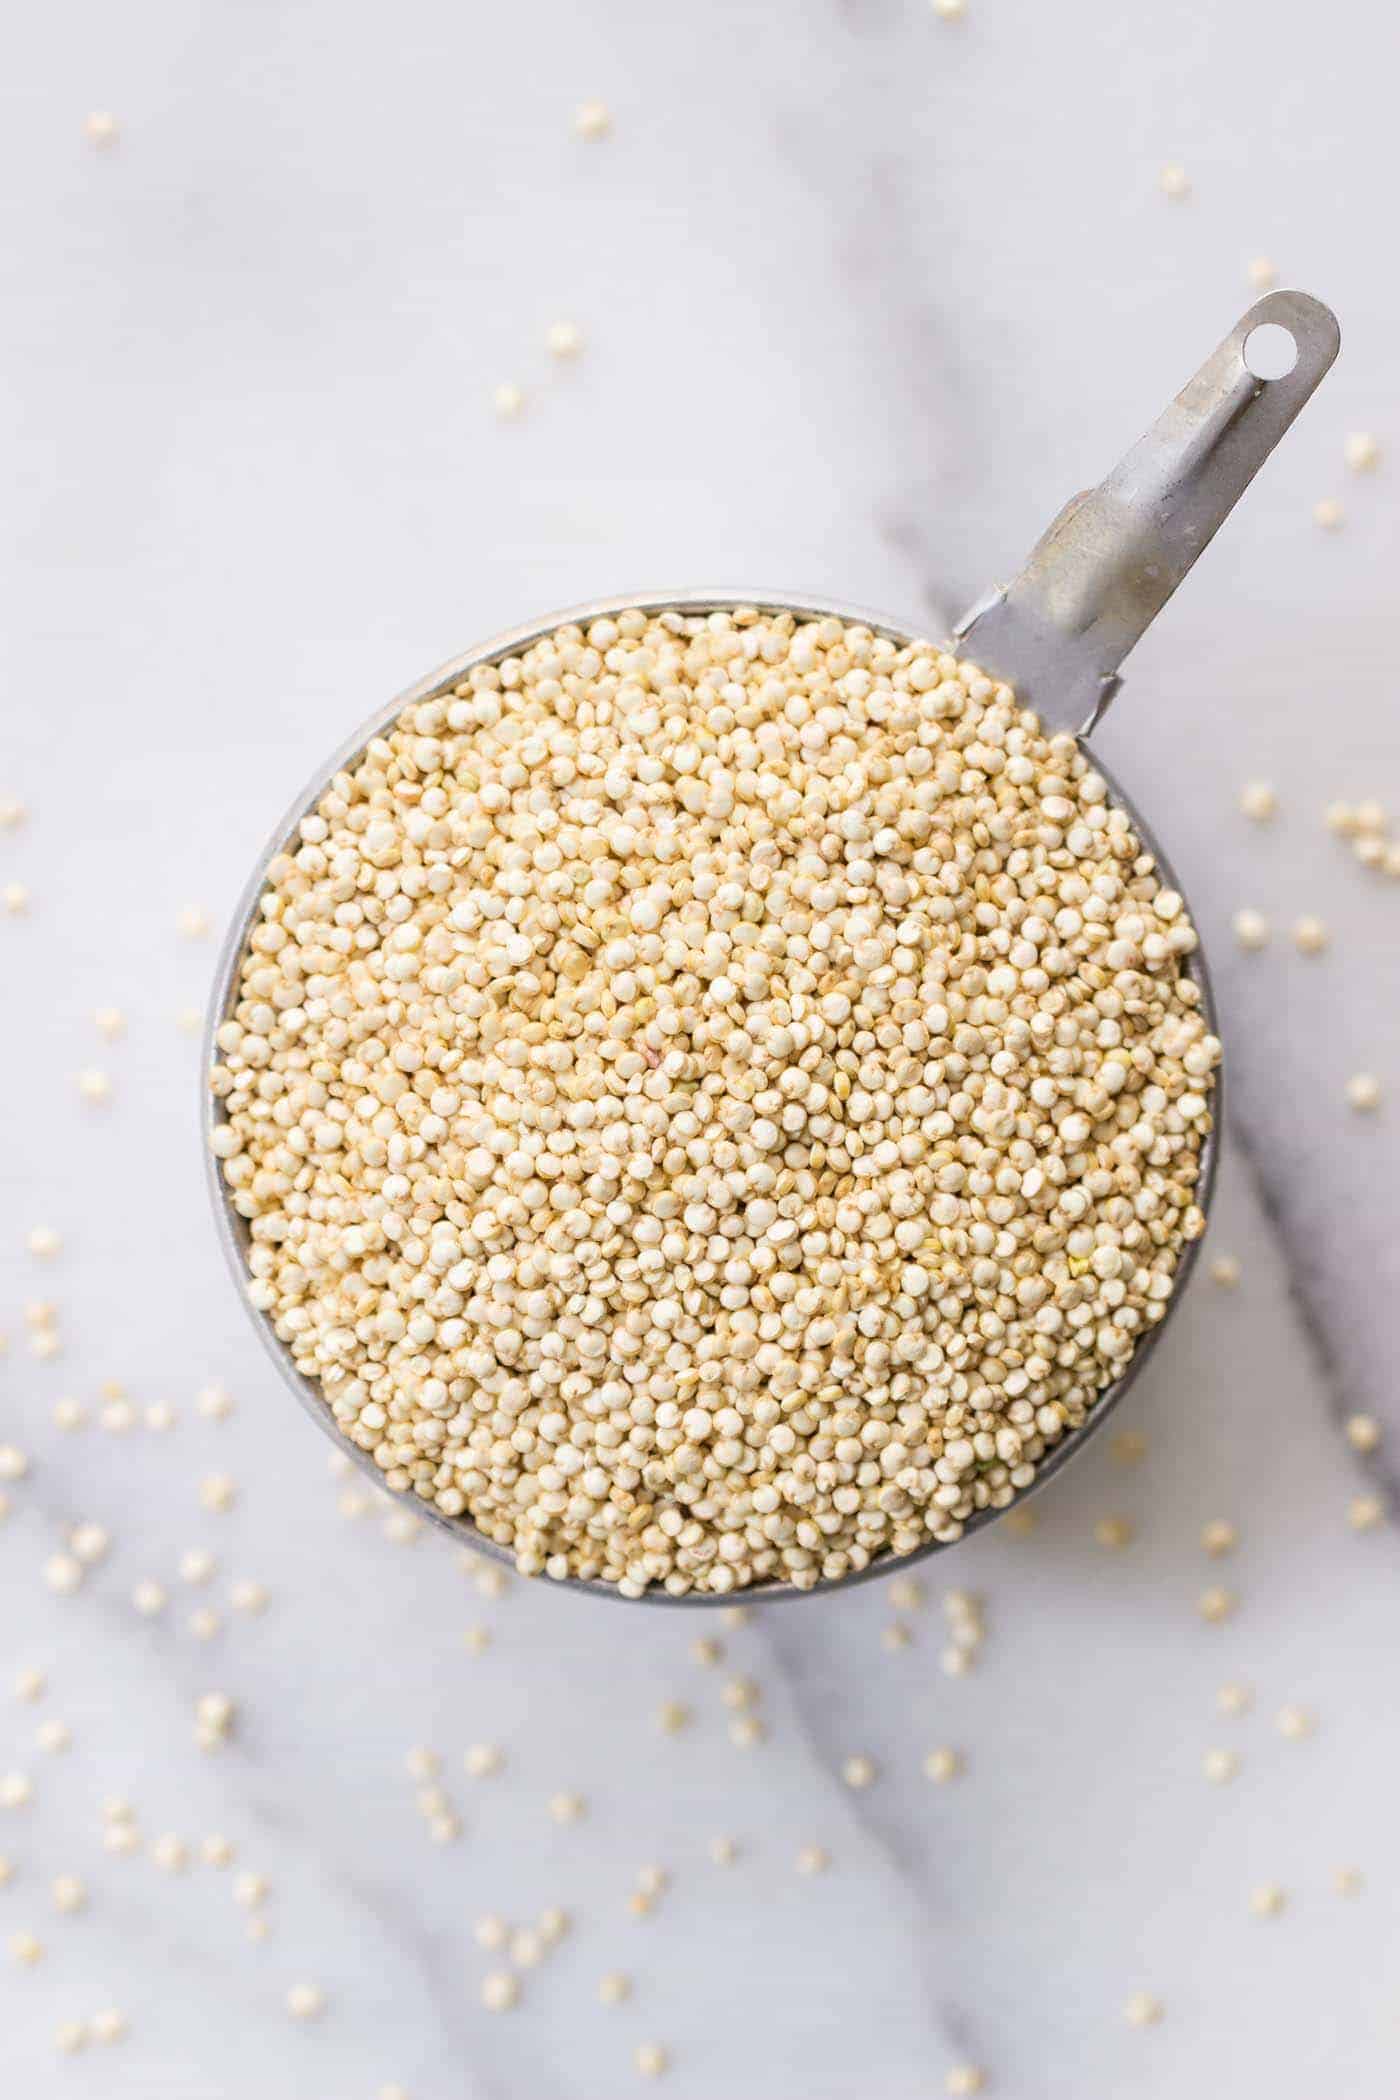 QUINOA: one of the six staple whole grains you should have you in your pantry!